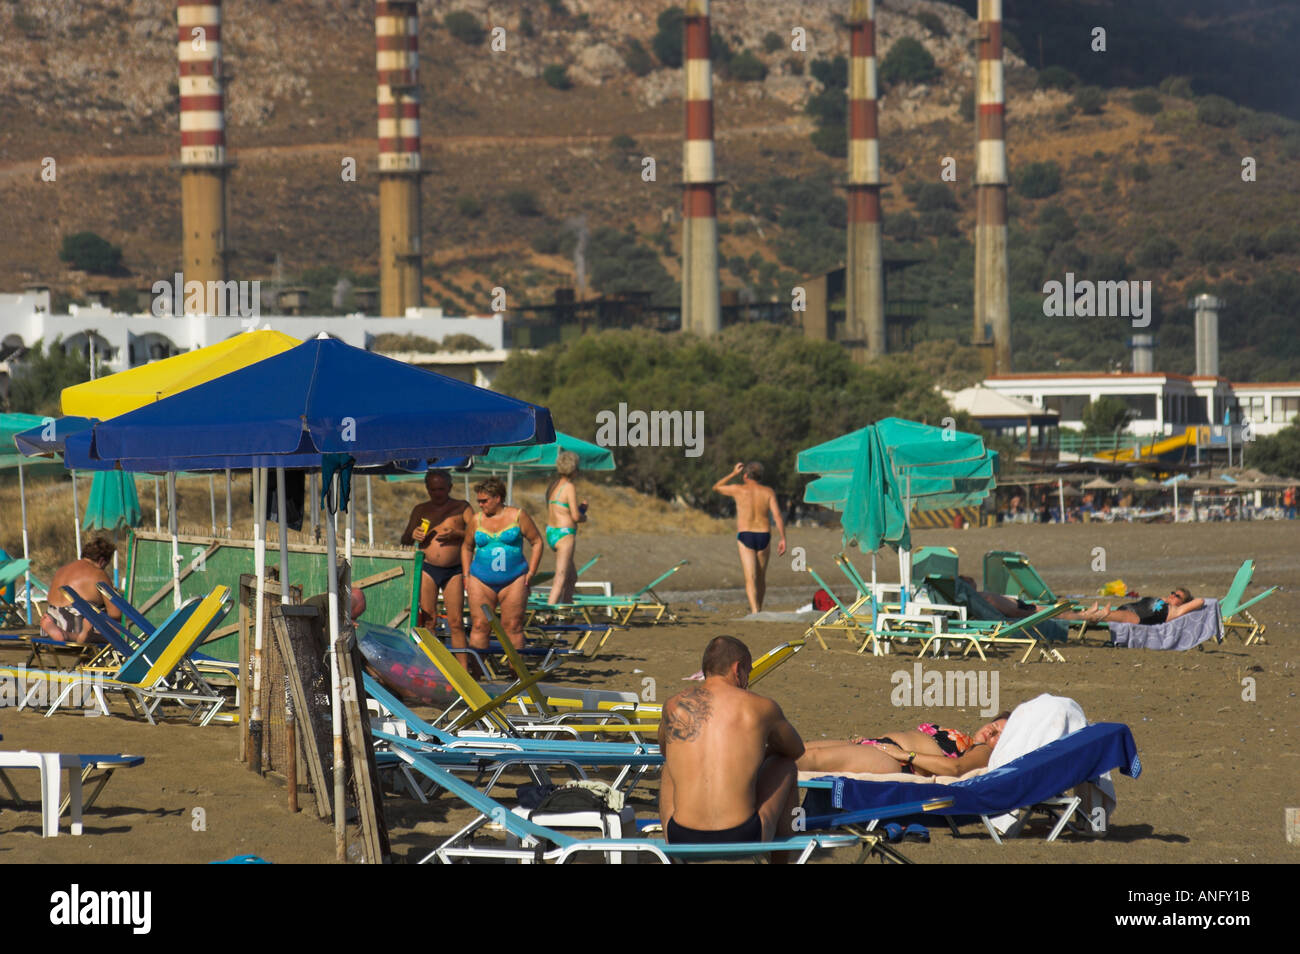 Greece Crete Ammoudara people at the beach with umbrelas and power plant chimneys in bkgd Stock Photo